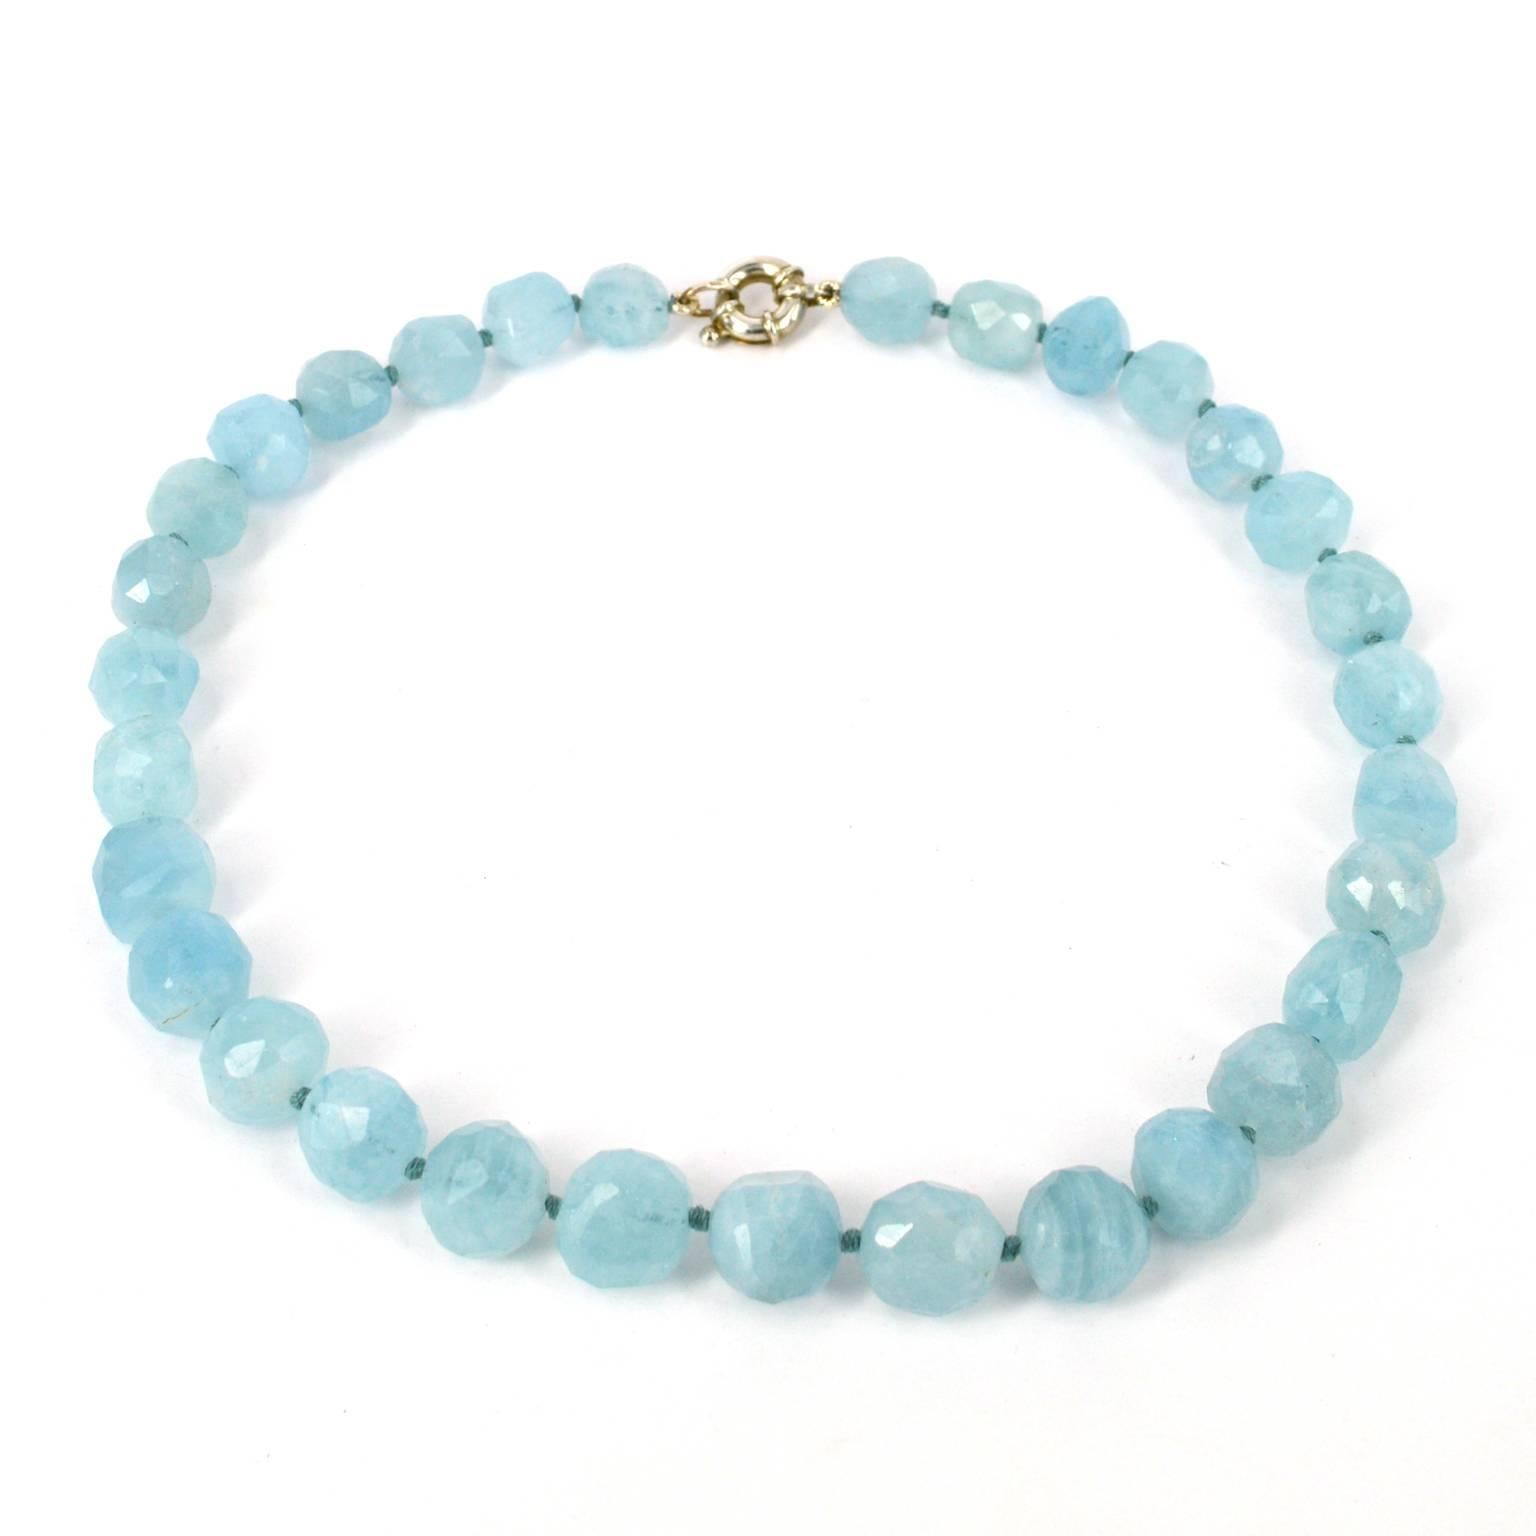 Stunning pastel blue colour in this graduated faceted Aquamarine necklace.
Natural stone hand knotted on aqua coloured thread.
Sterling Silver bolt clasp.
Total length 46cm

All stones and pearls are natural and as such may include natural